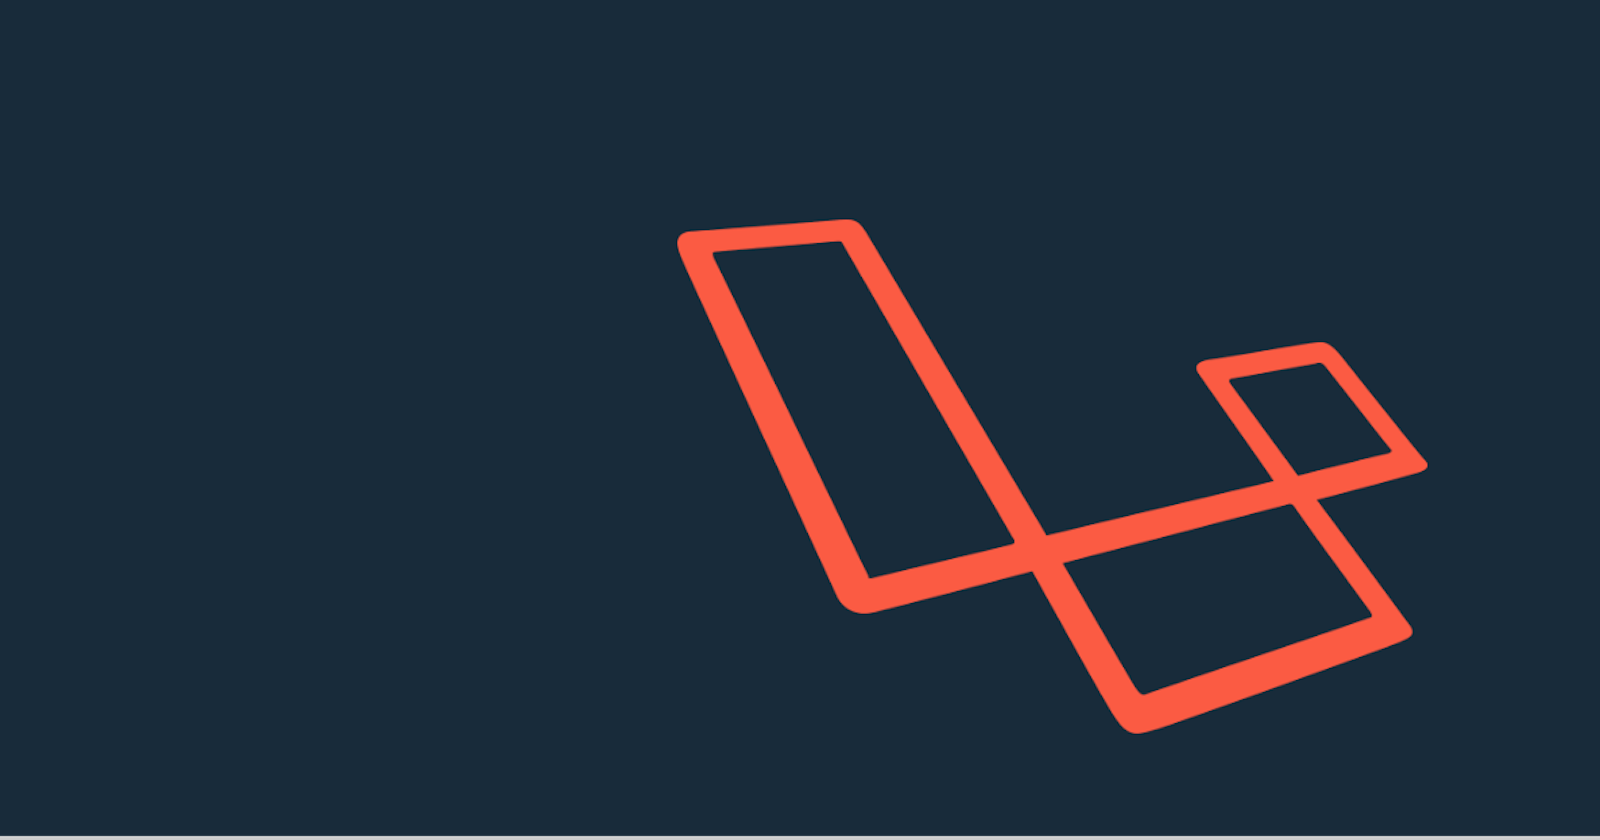 Laravel: Experiences and difficulties